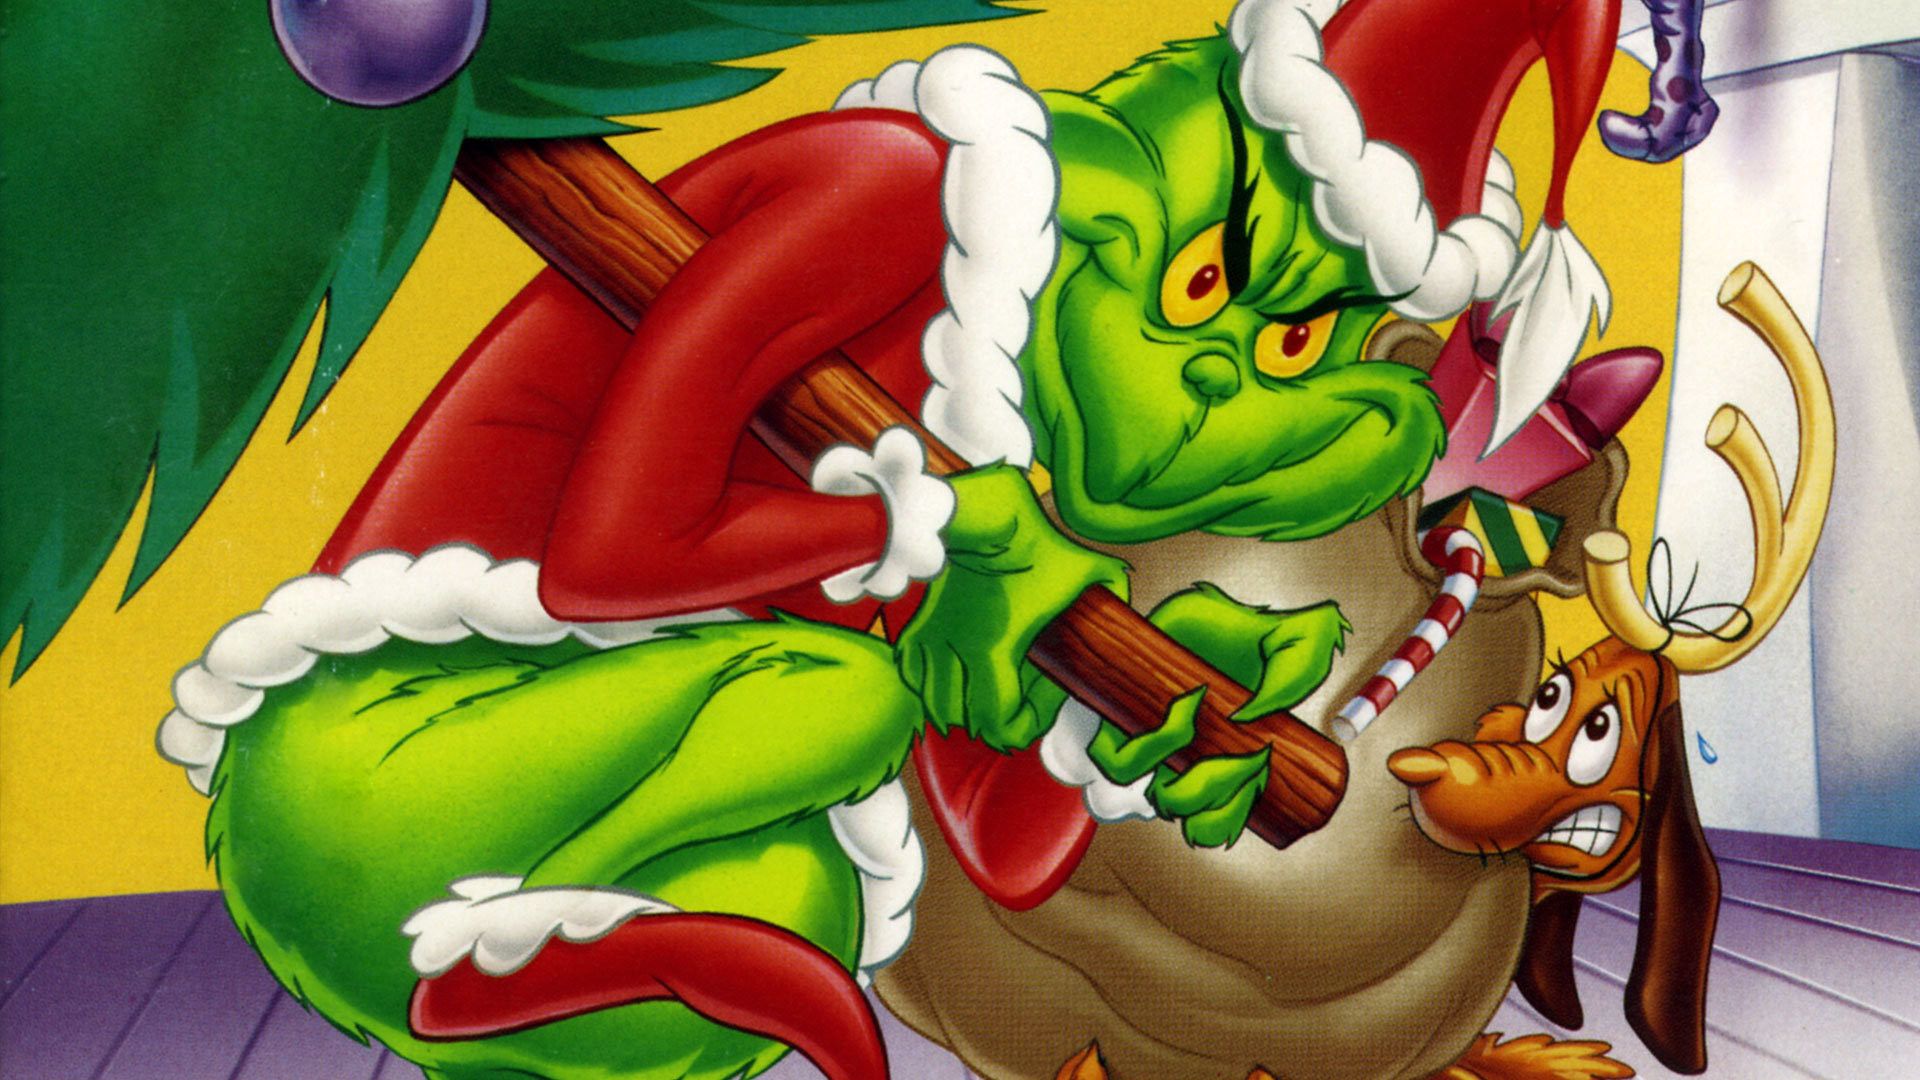 hd wallpaper the grinch - Background Wallpapers for your Desktop ...